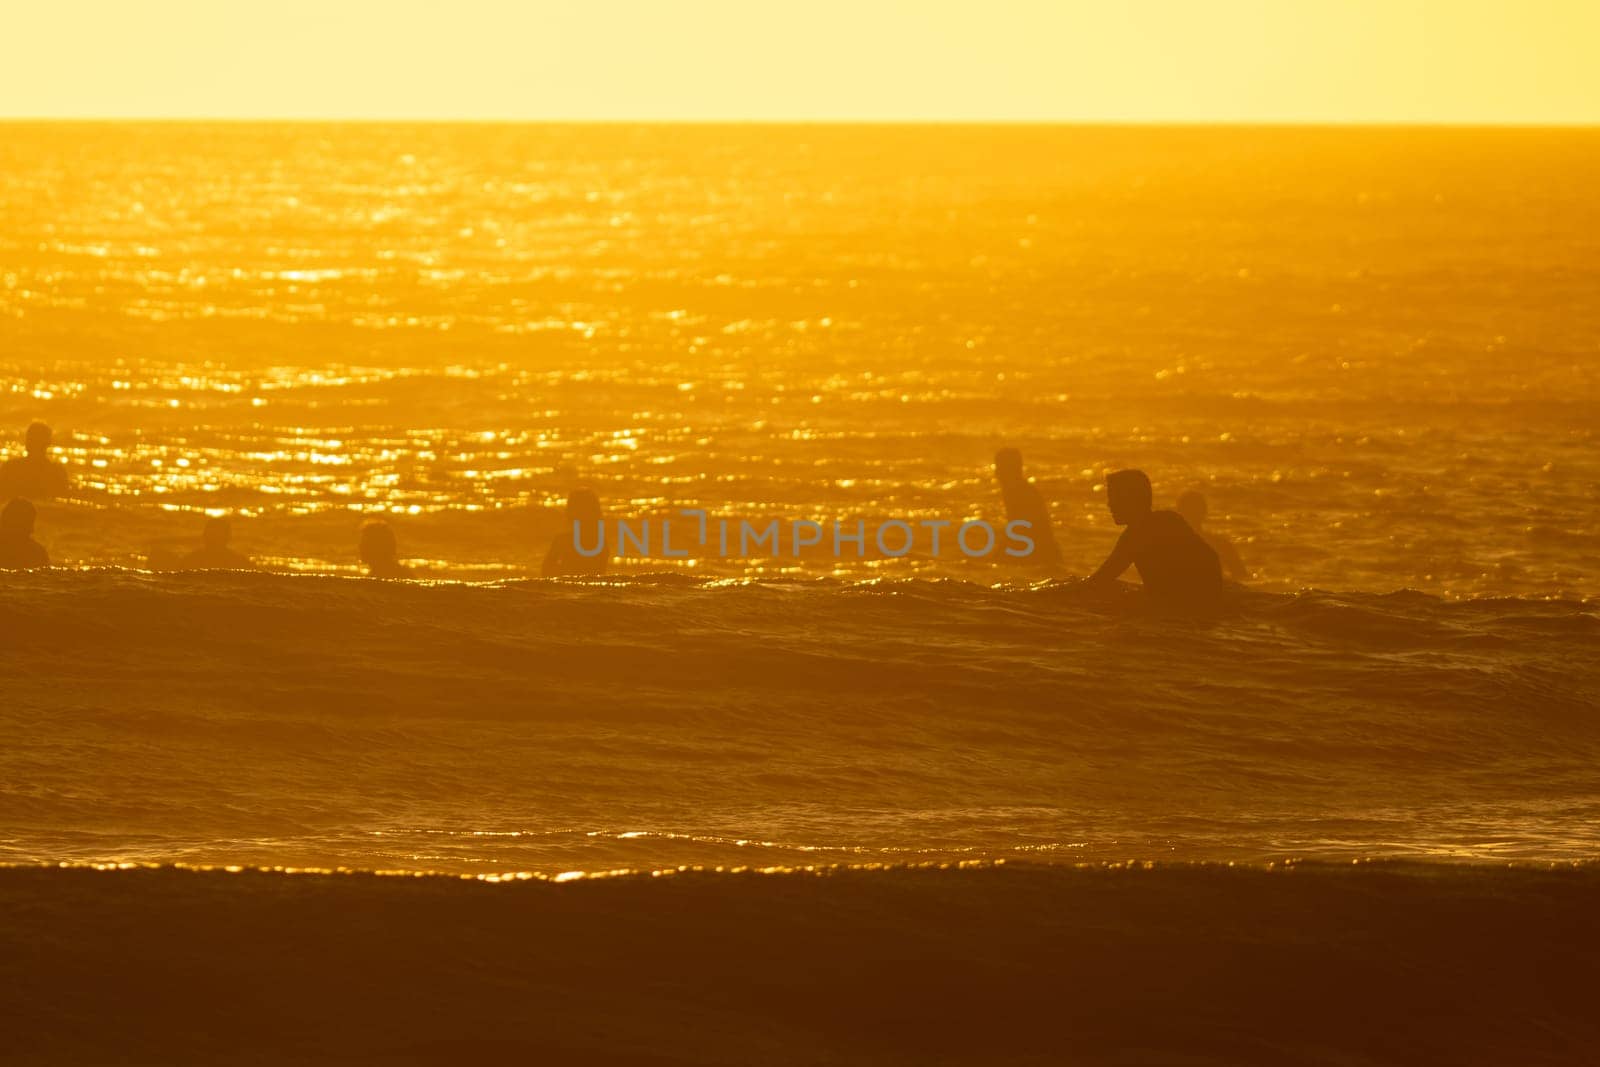 People swimming in the sea at bright orange sunset. Mid shot